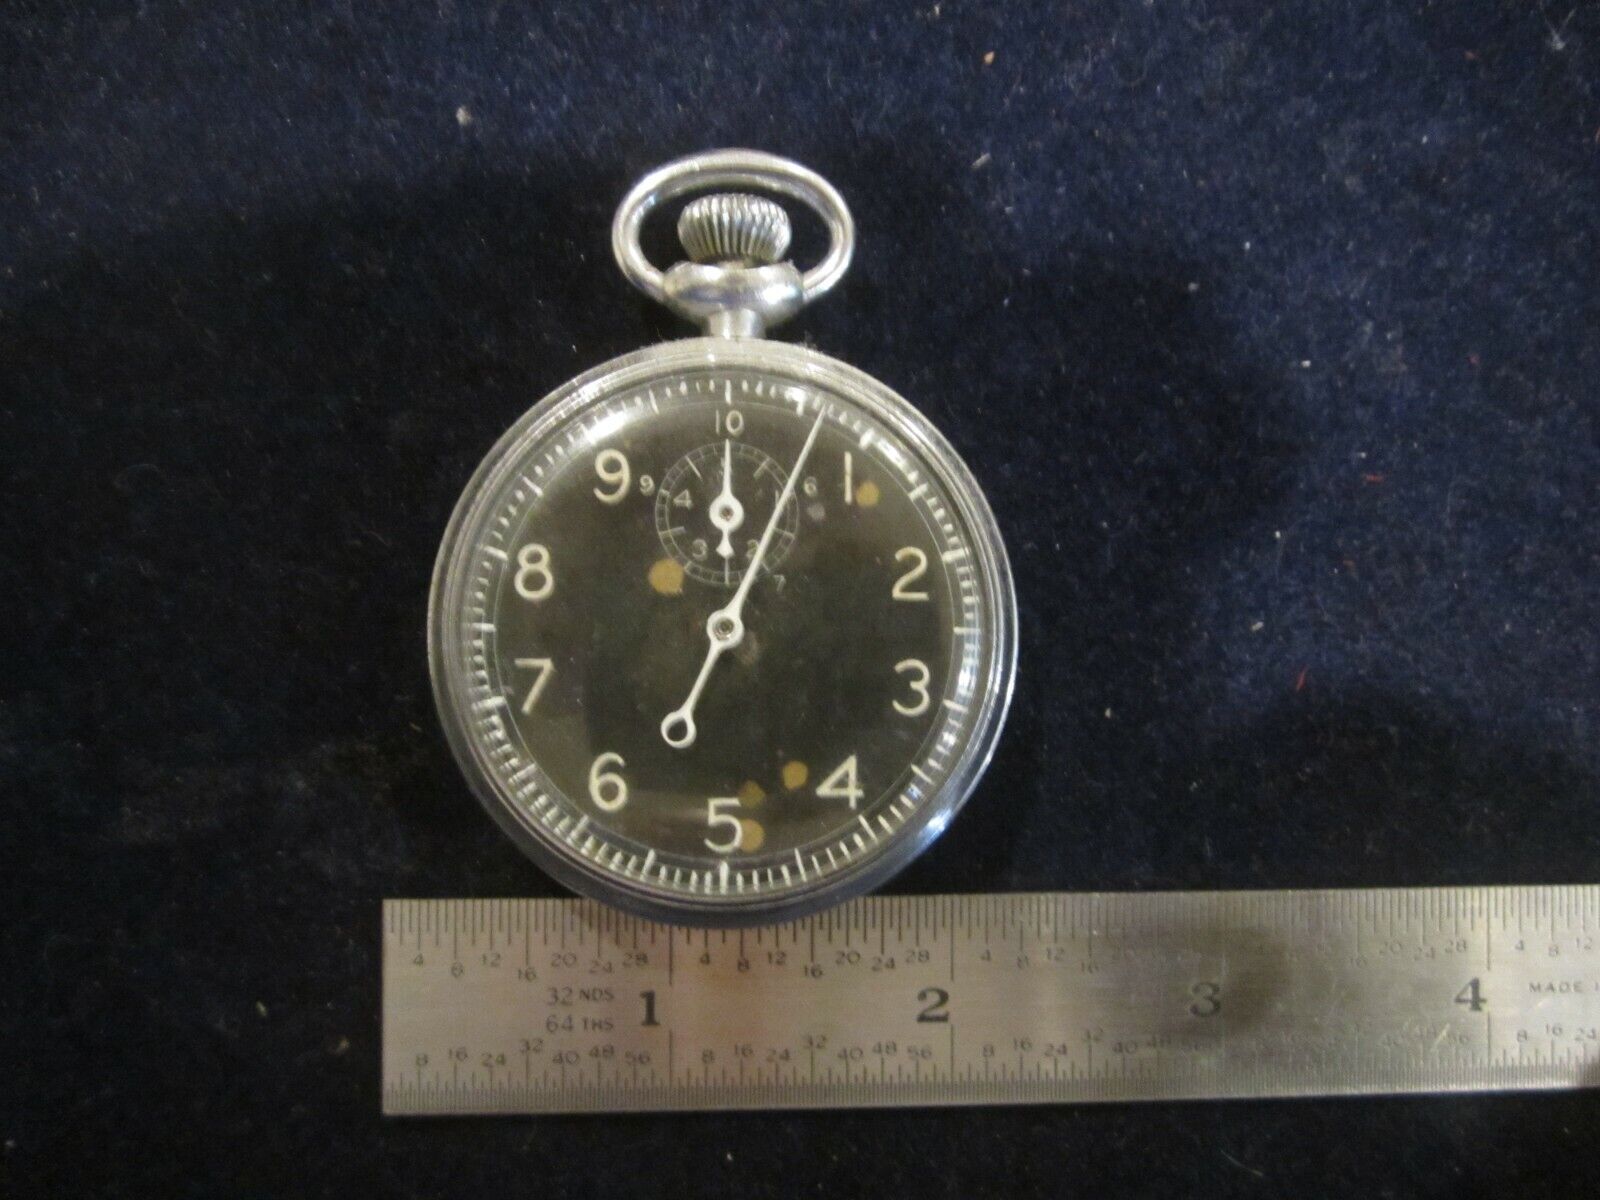 Vintage Waltham Type A-8 bomb timer stop watch working fine AF-44-15539 Military